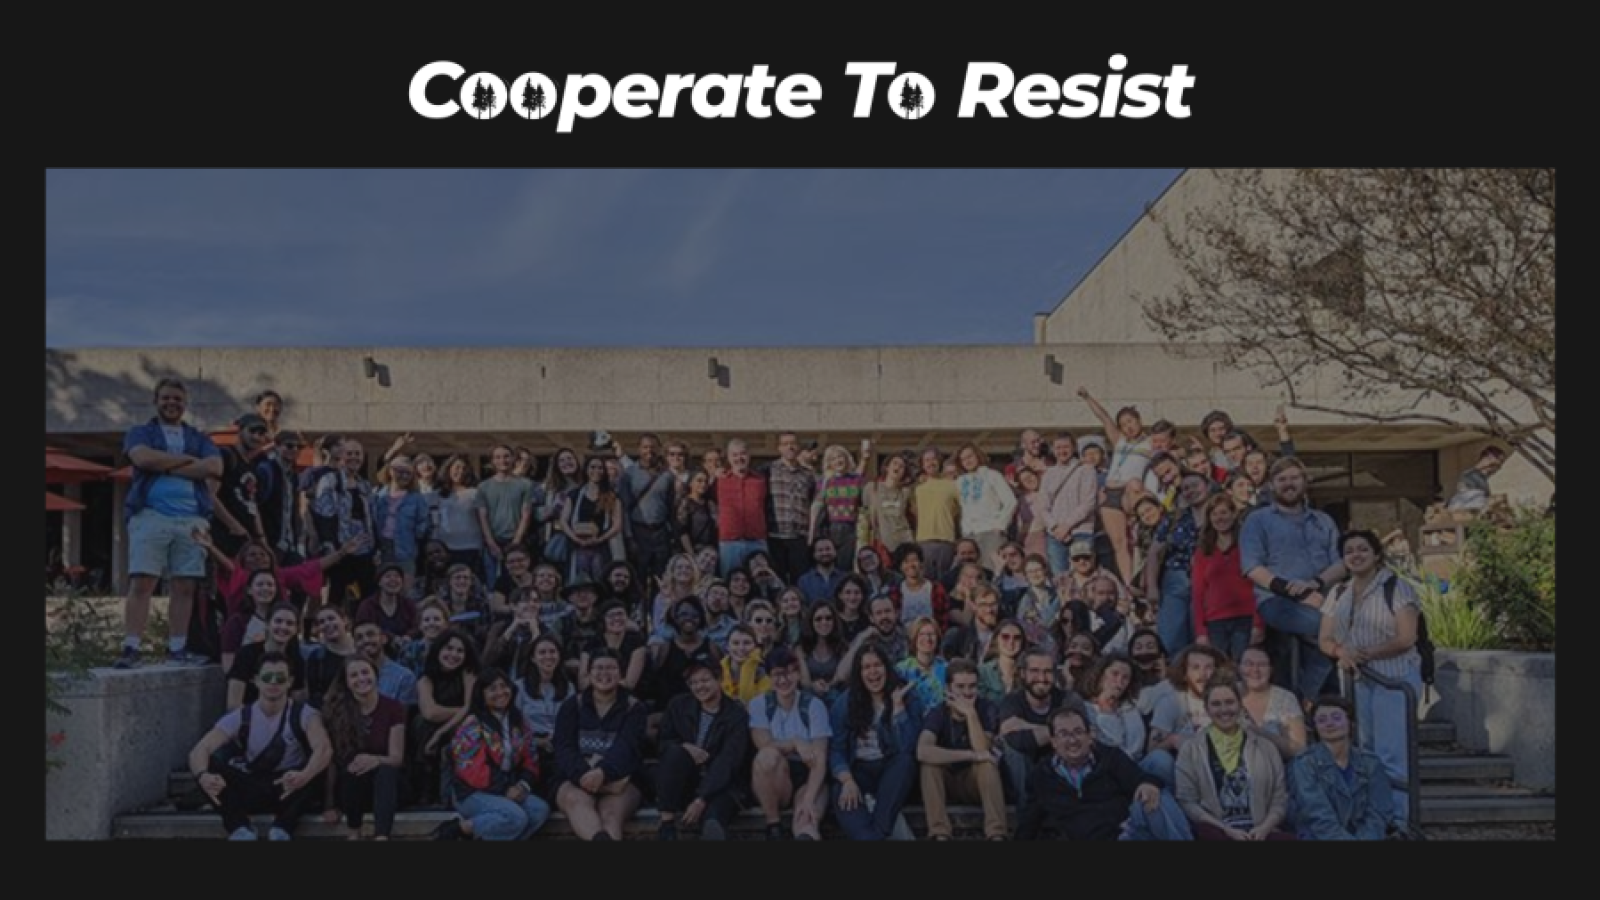 Text: Cooperate to Resist Fundraiser. Image: a large group of about 75 people posing for a group picture outside a building. Happy excited postures for cooperatives!